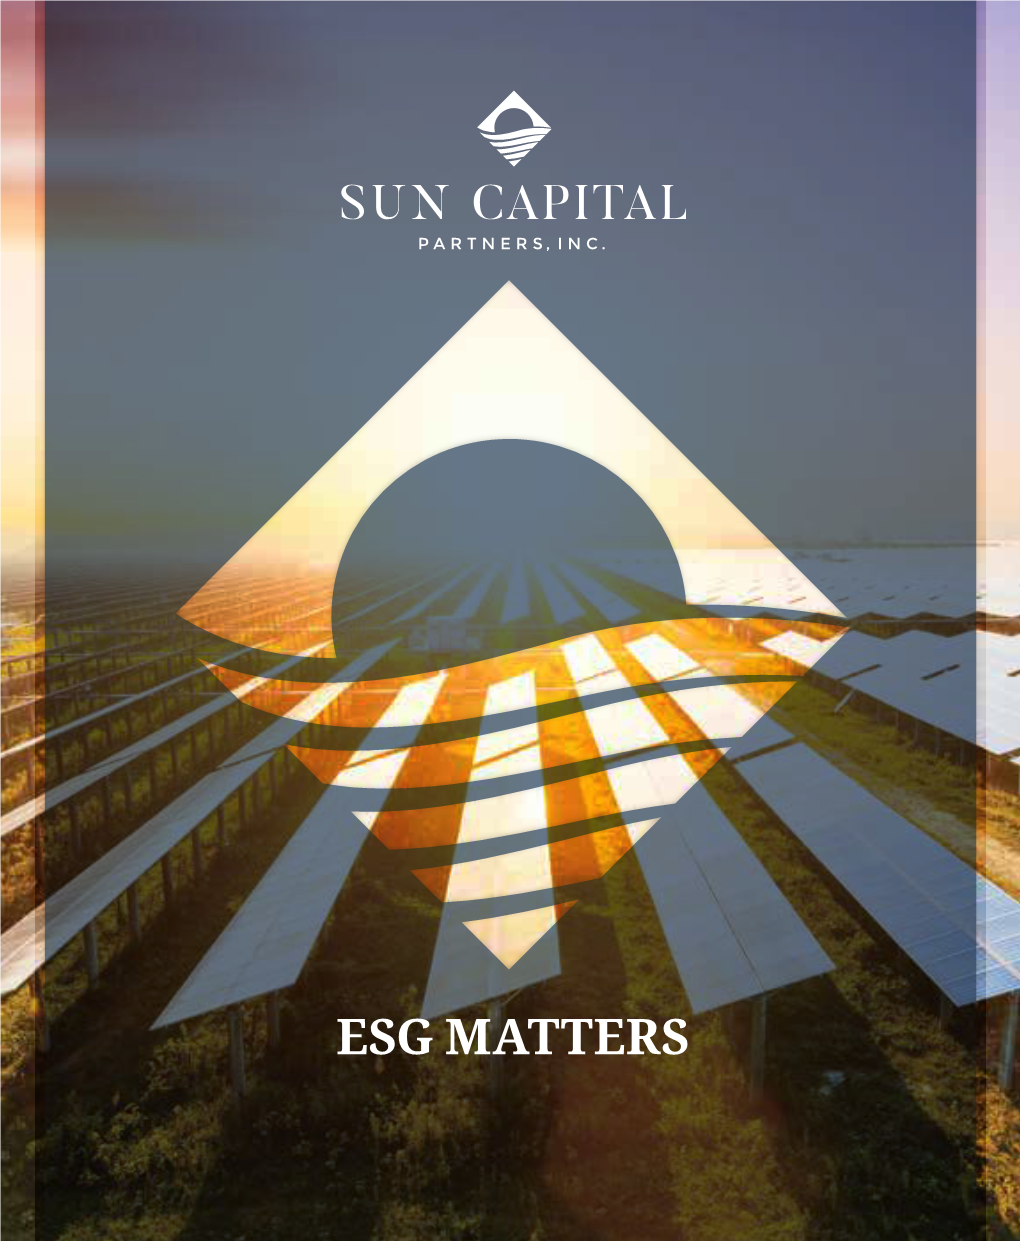 ESG MATTERS We Have Long Been Proponents of Environmental, Social and Governance (ESG) Practices and Incorporating Them Into Sun Capital and Our Portfolio